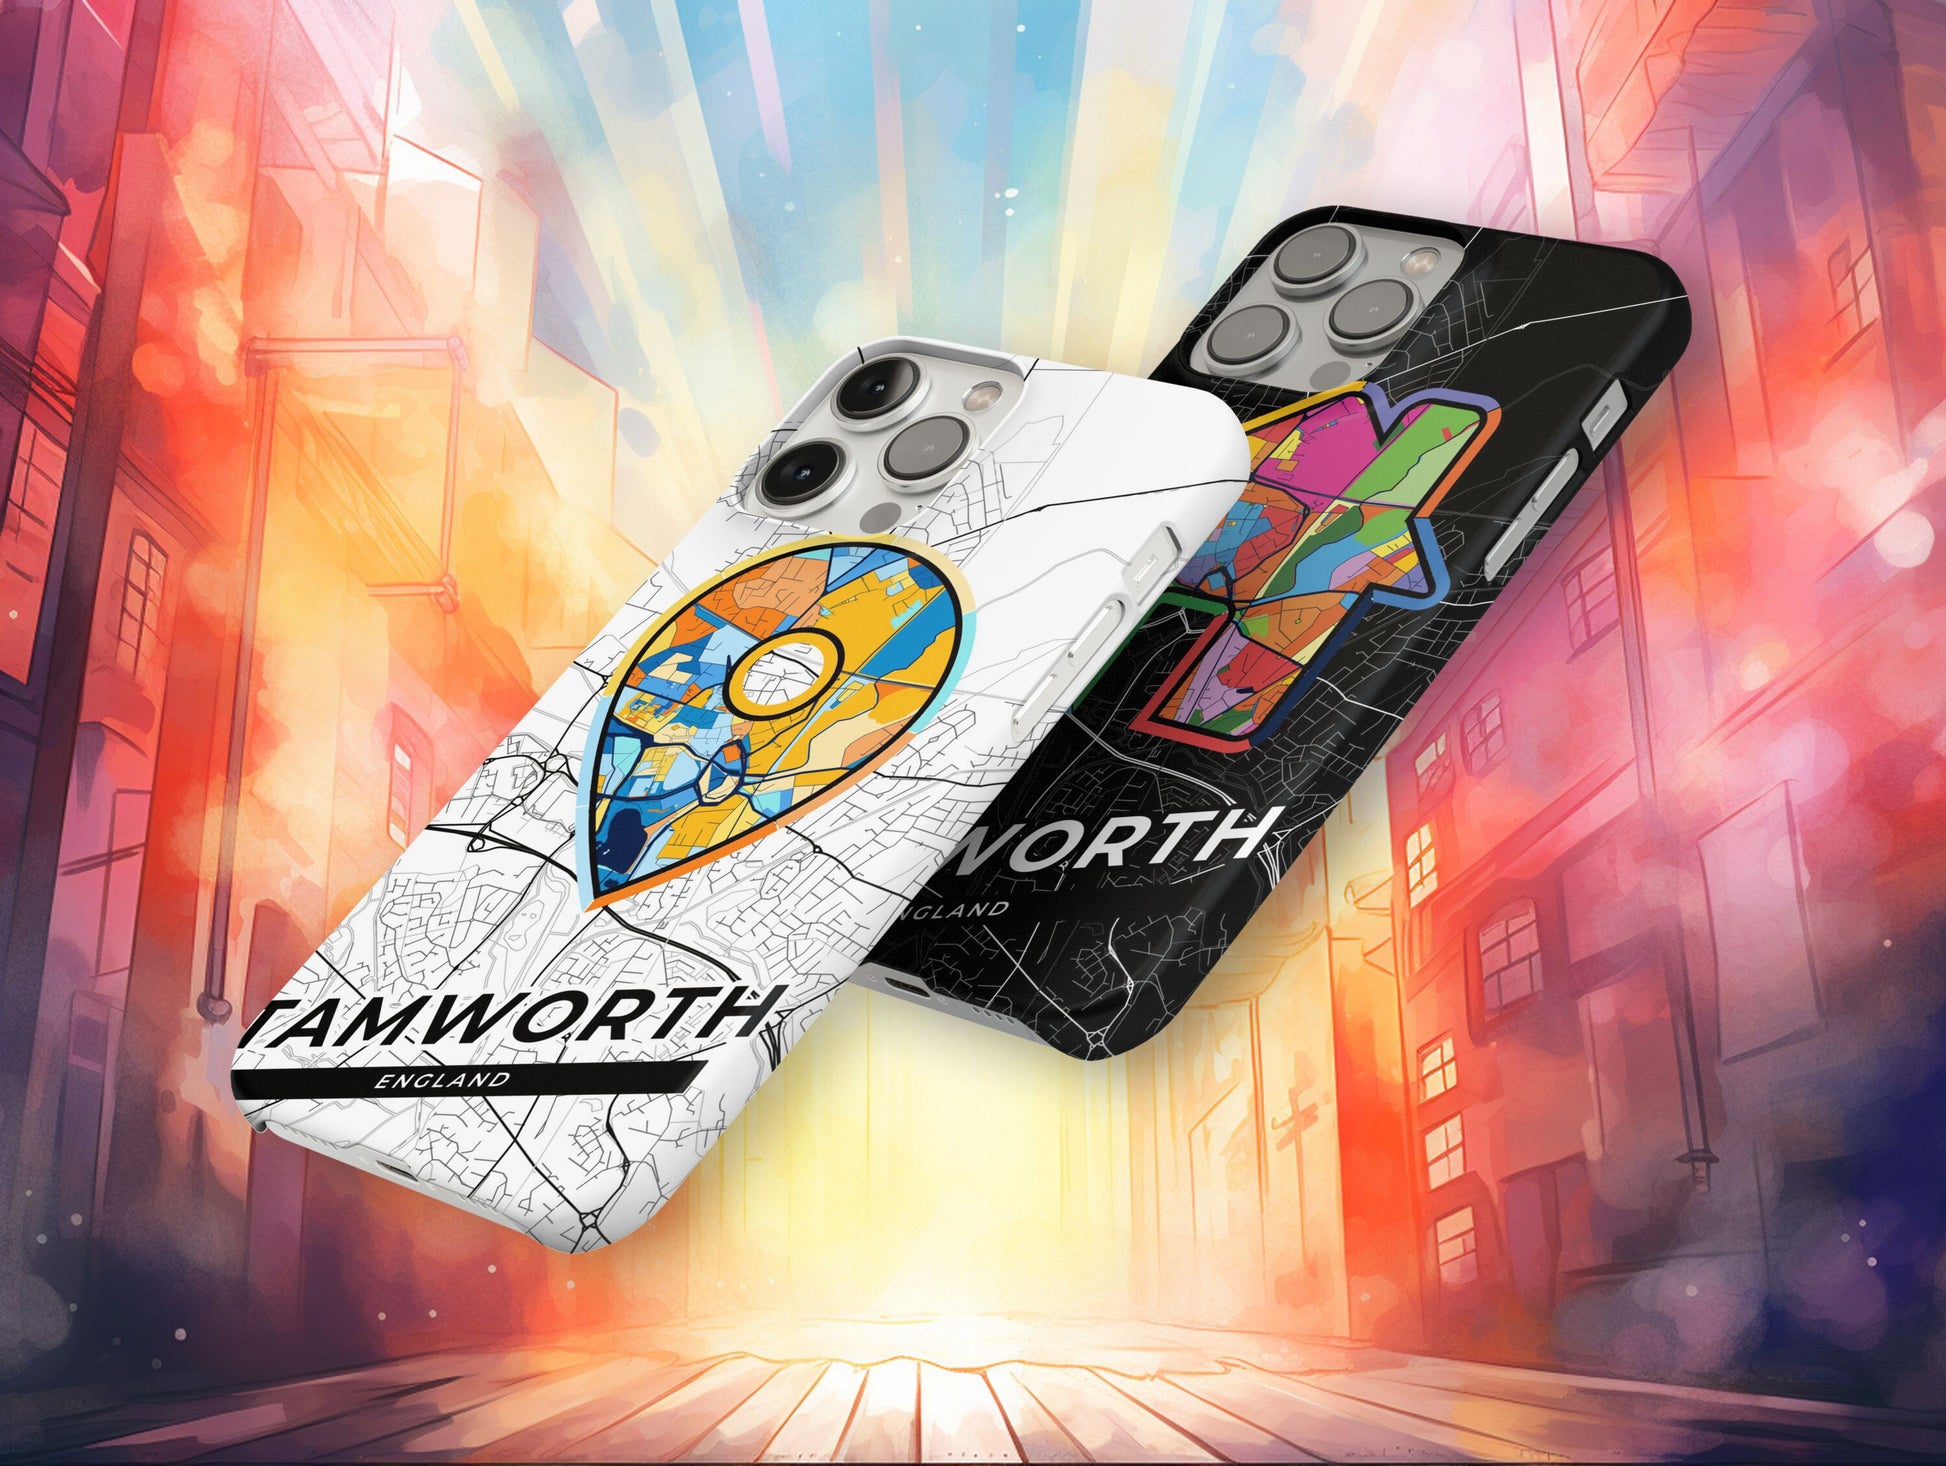 Tamworth England slim phone case with colorful icon